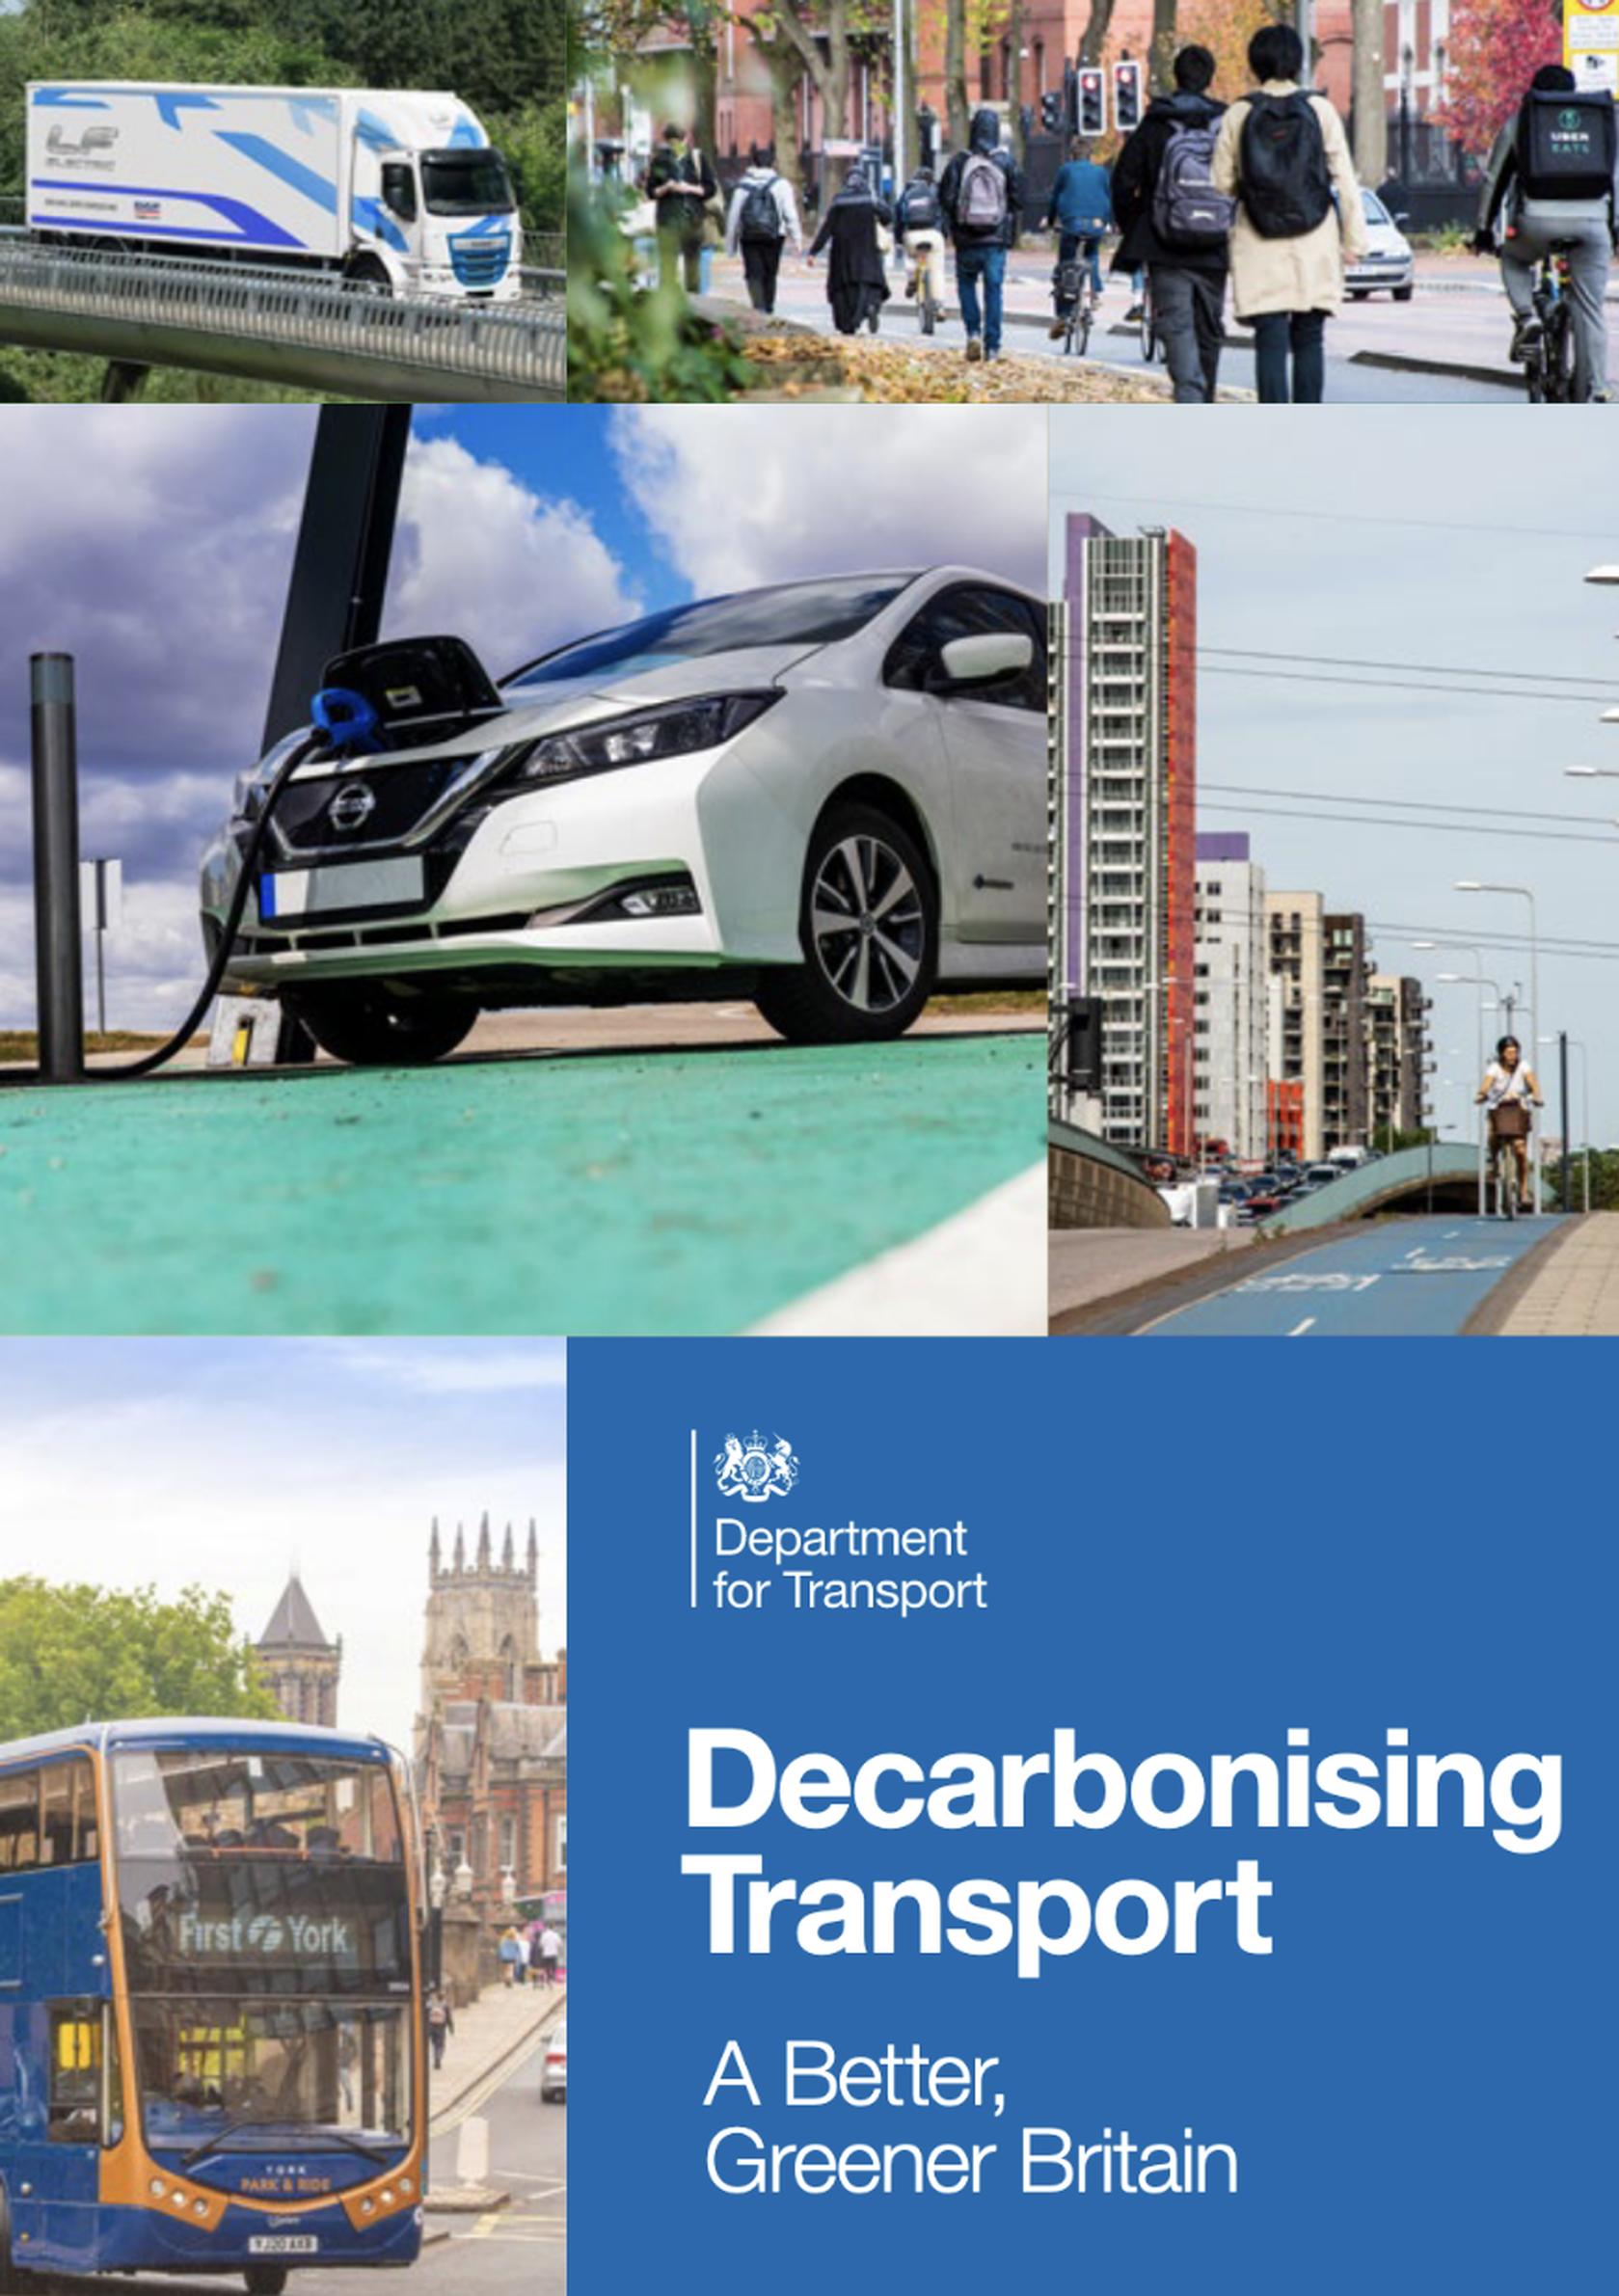 DfT launches transport decarbonisation toolkits